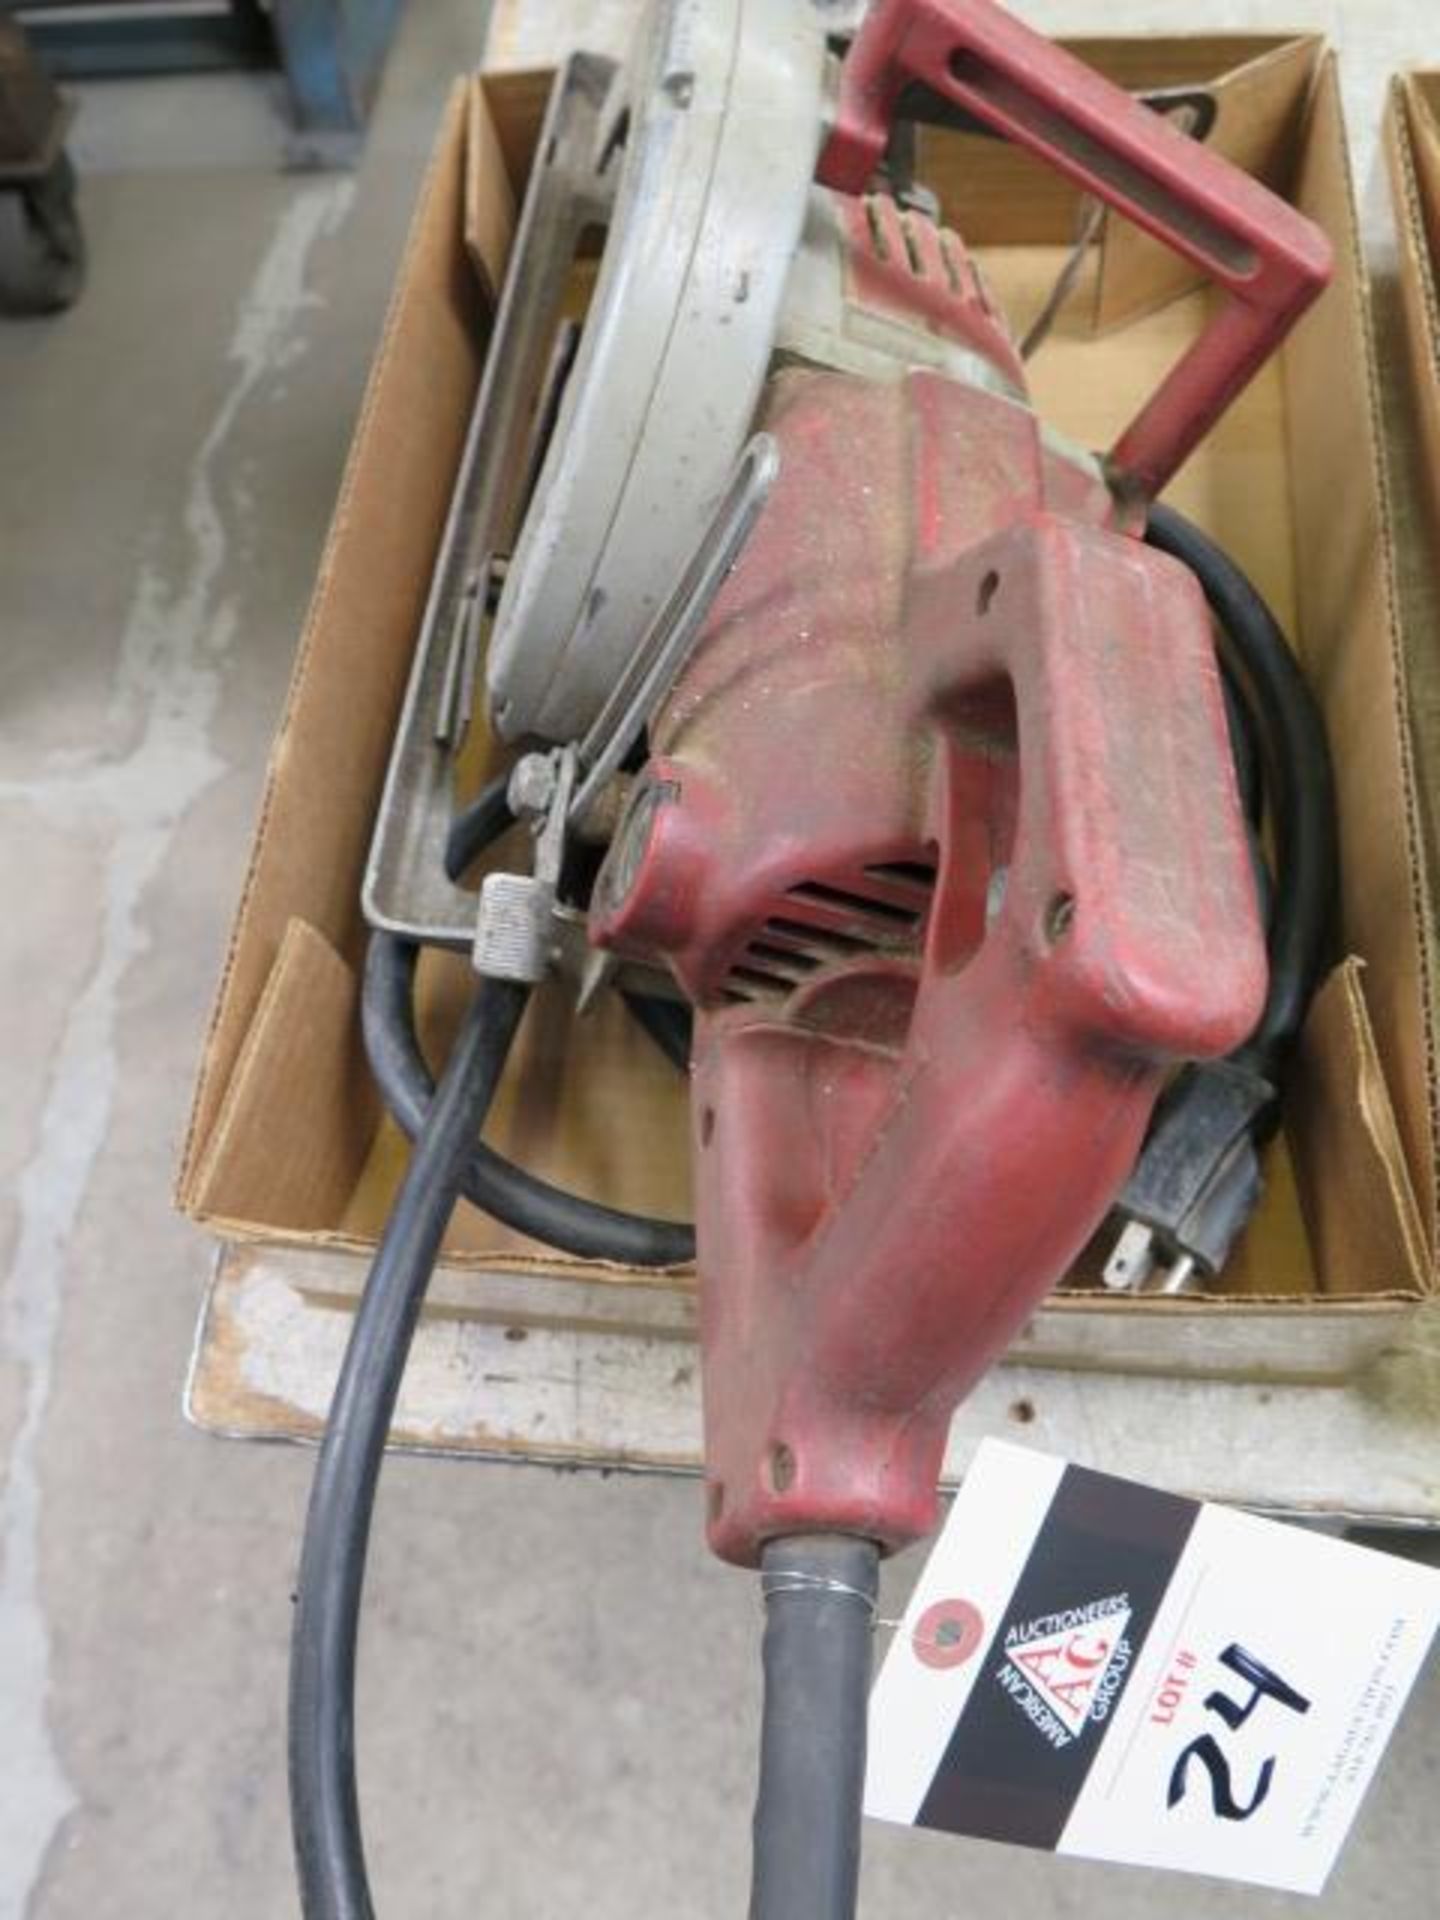 Milwaukee Circular Saw (SOLD AS-IS - NO WARRANTY)